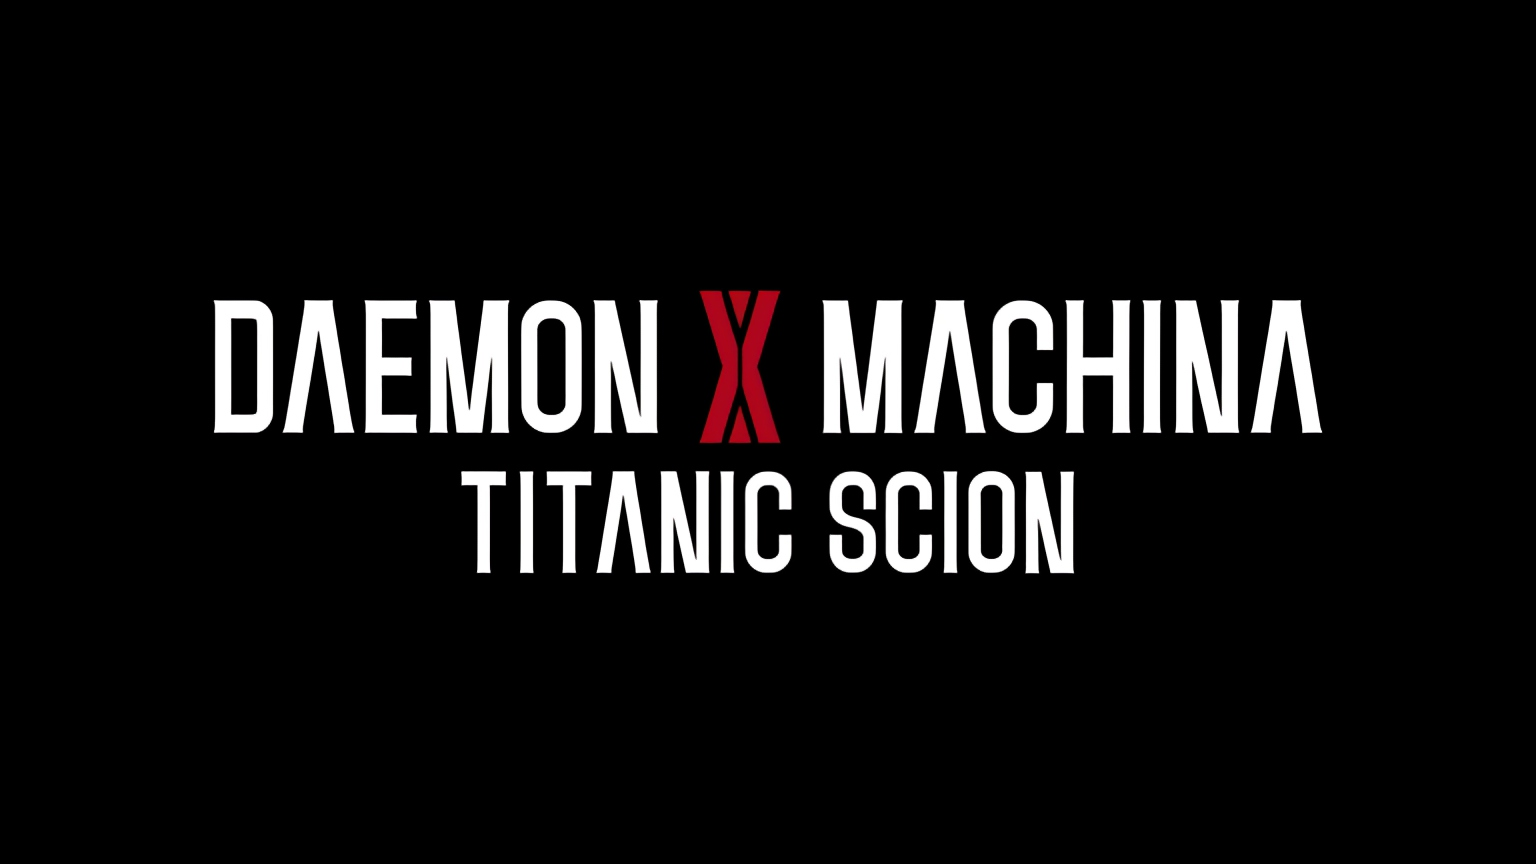 An all-new entry in the third-person mech shooter series, DAEMON X MACHINA: Titanic Scion